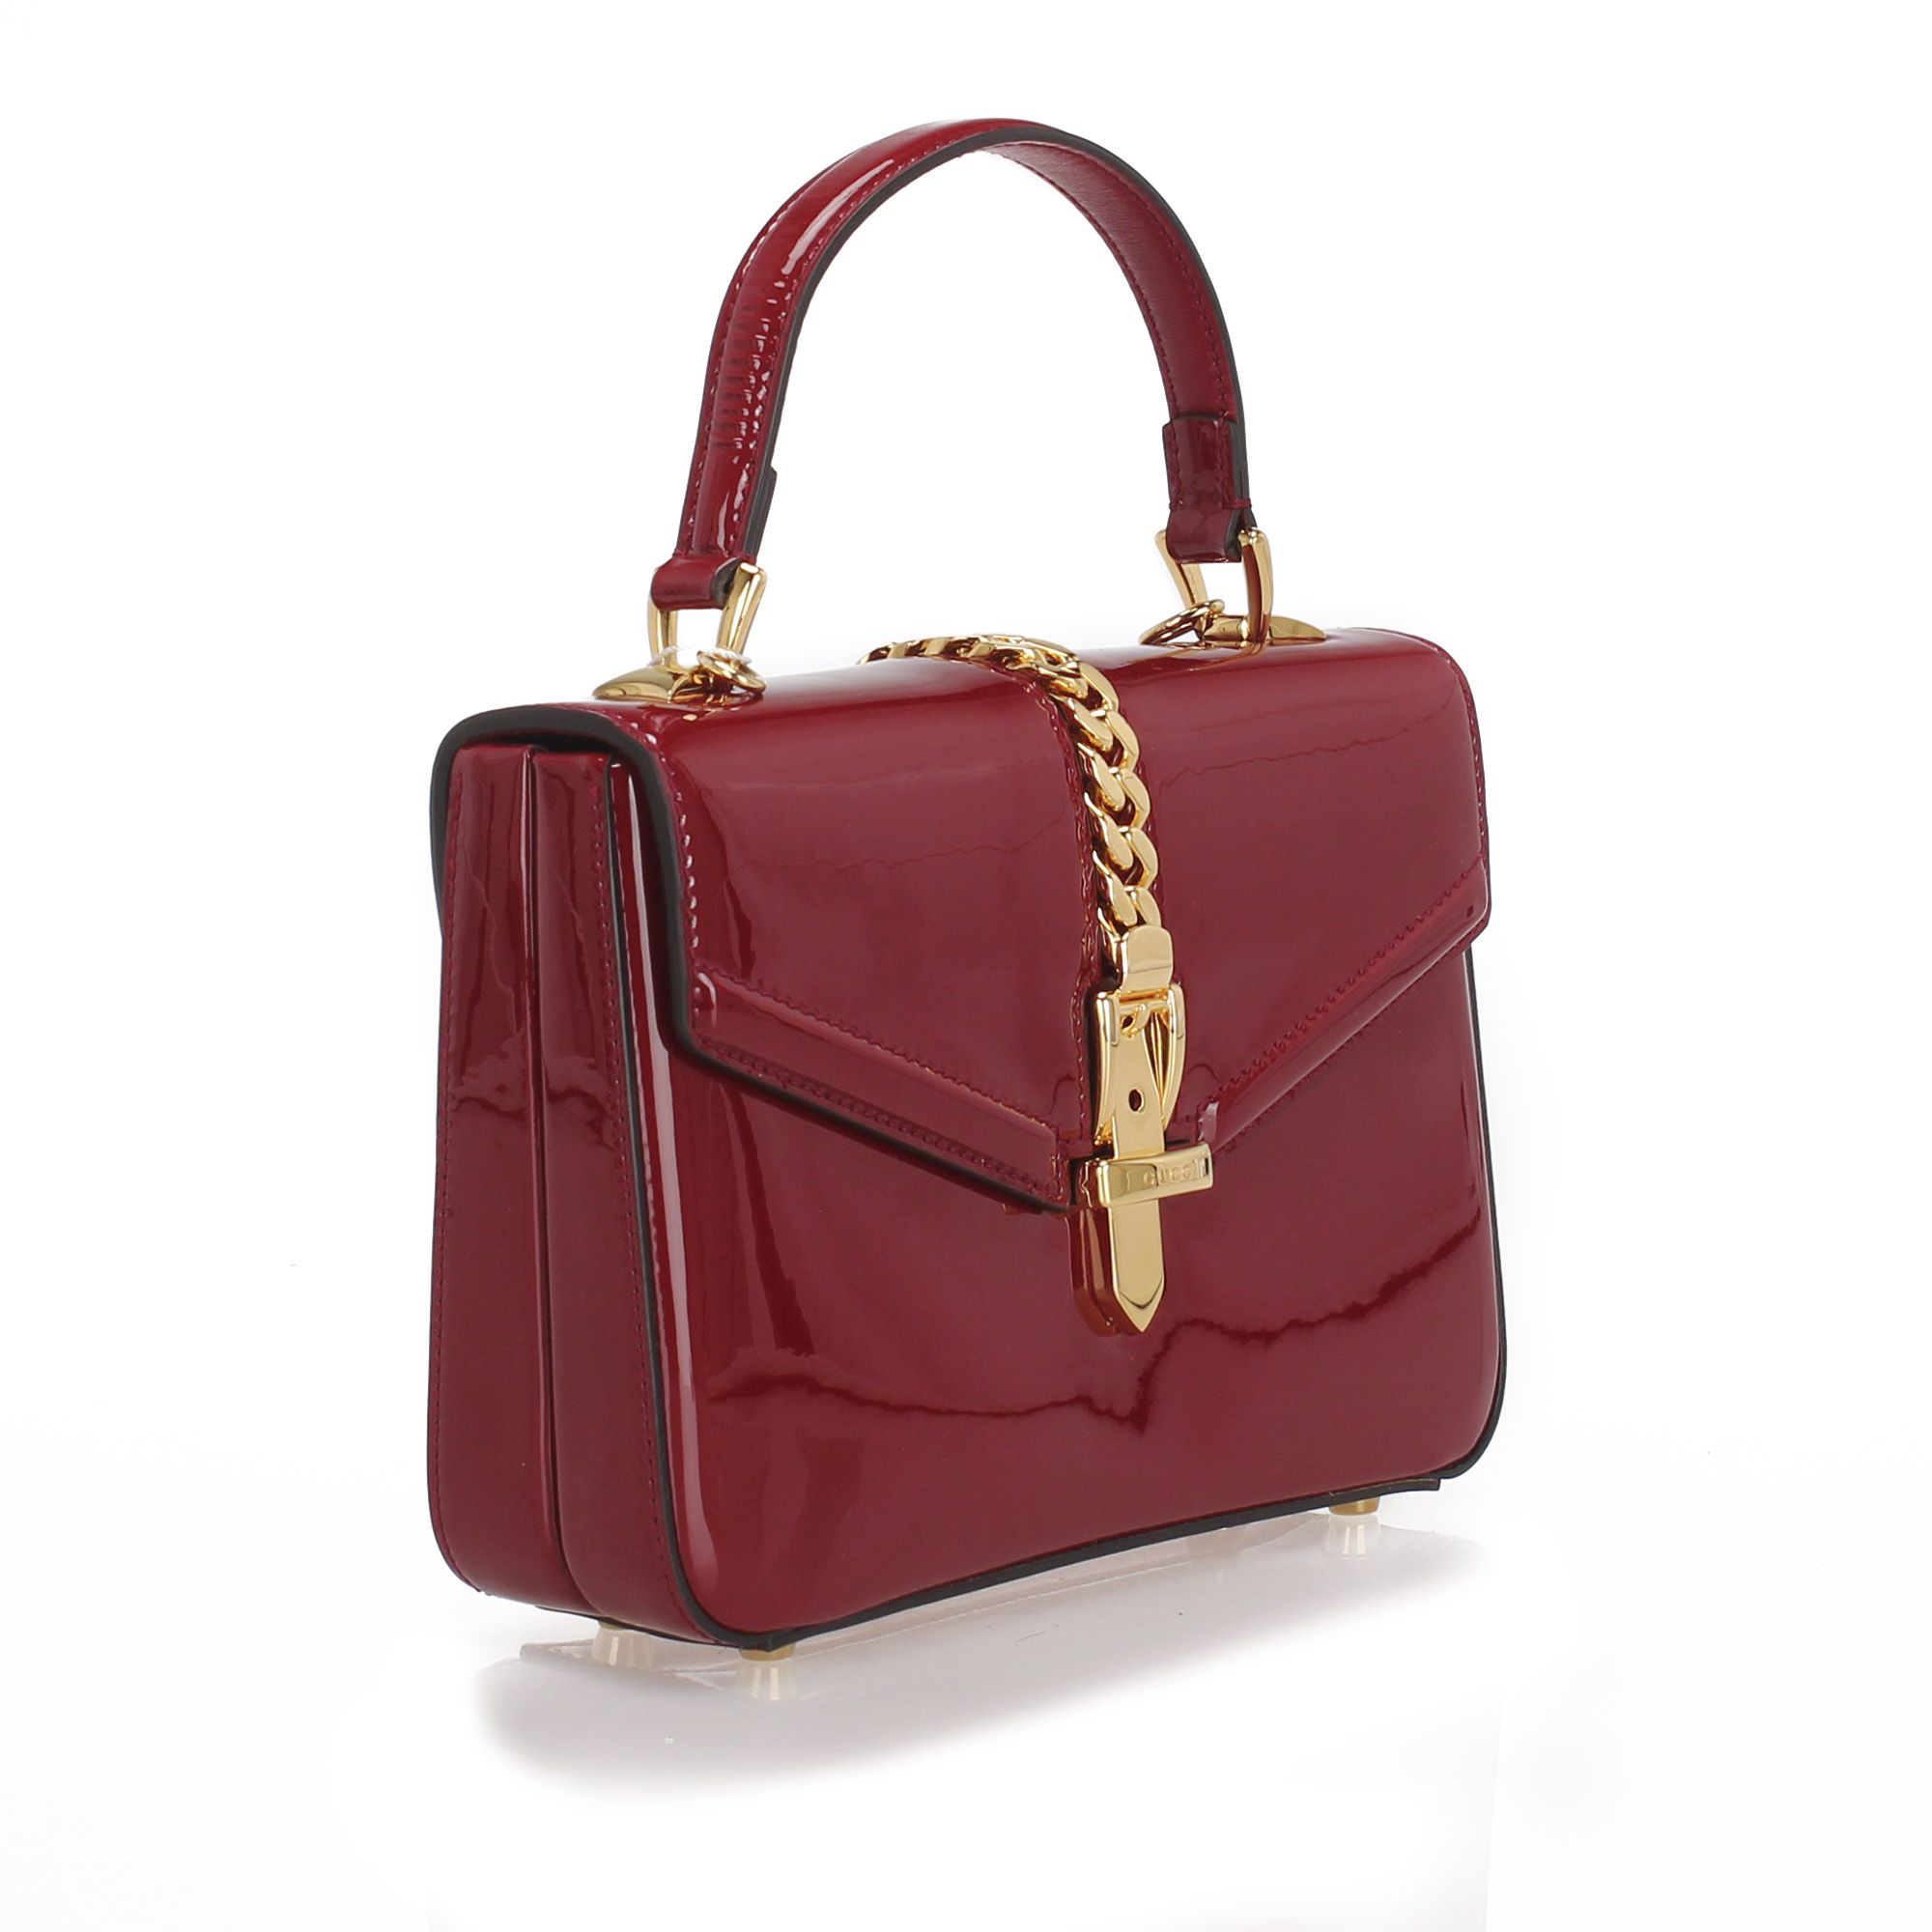 VINTAGE. RRP AS NEW. The Sylvie 1969 features a patent leather body, a gold-tone chain strap, a front flap with magnetic snap closure, and an interior slip pockets.Handle is slightly wrinkled.

Dimensions:
Length 15cm
Width 18cm
Depth 6cm
Hand Drop 10cm
Shoulder Drop 50cm

Original Accessories: Dust Bag, Box, Authenticity Card

Color: Red
Material: Leather x Patent Leather
Country of Origin: Italy
Boutique Reference: SSU79927K1342


Product Rating: VeryGoodCondition